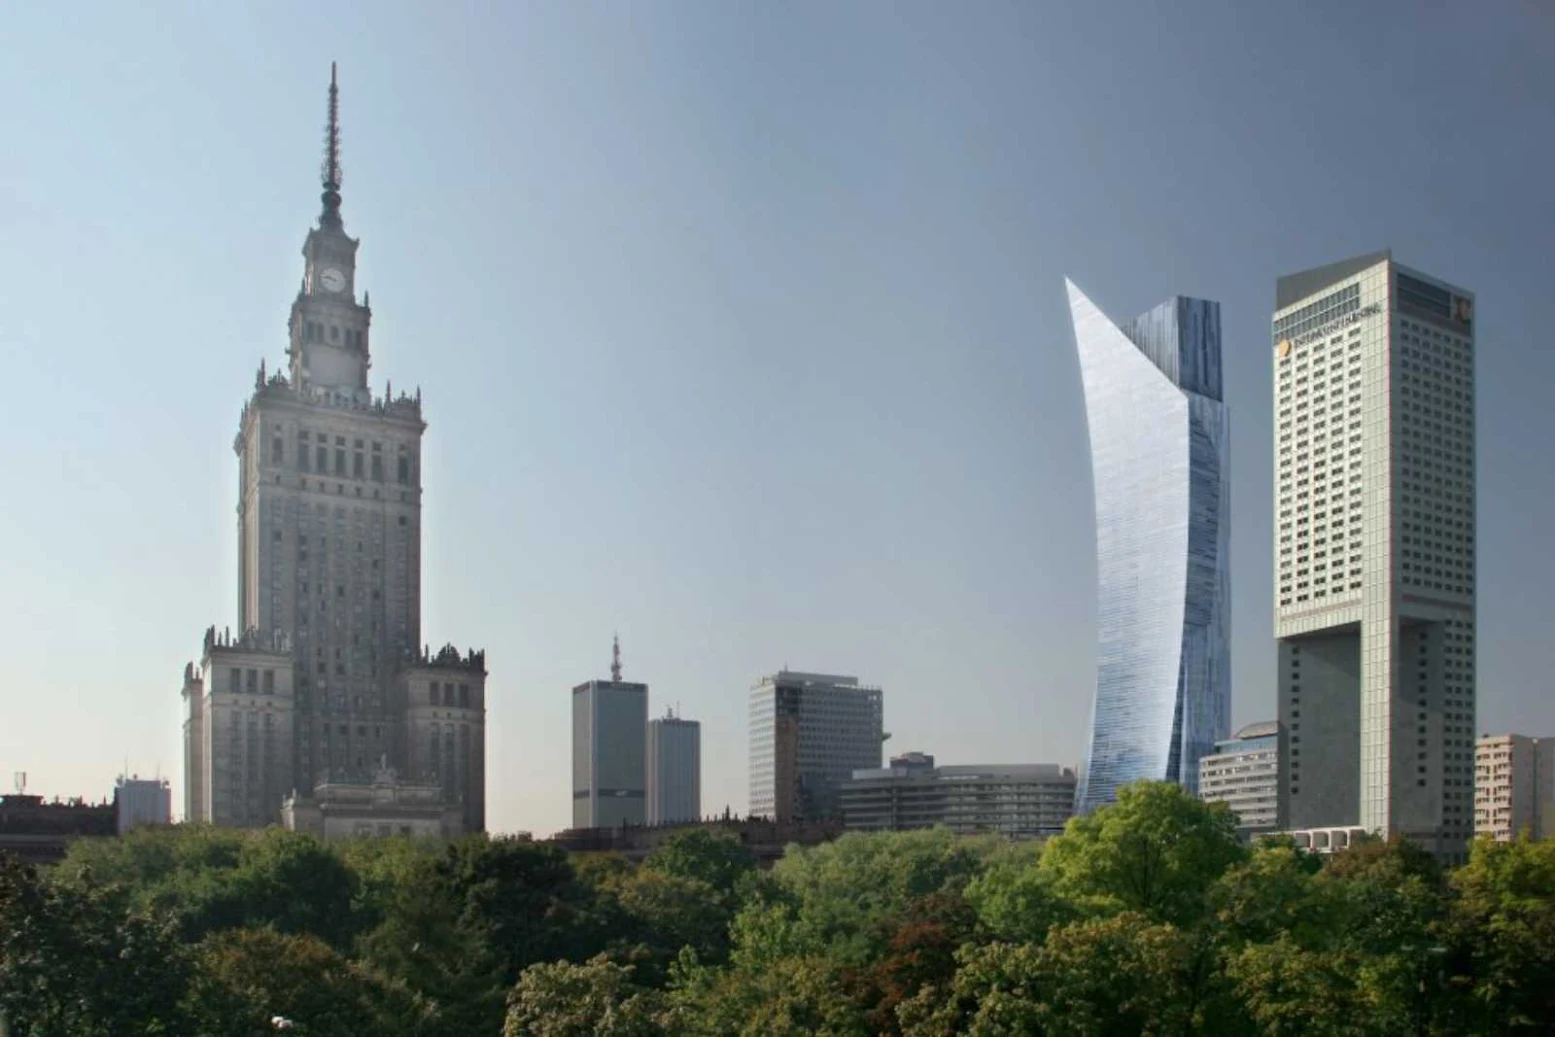 ZLOTA by Daniel Libeskind awarded with the European